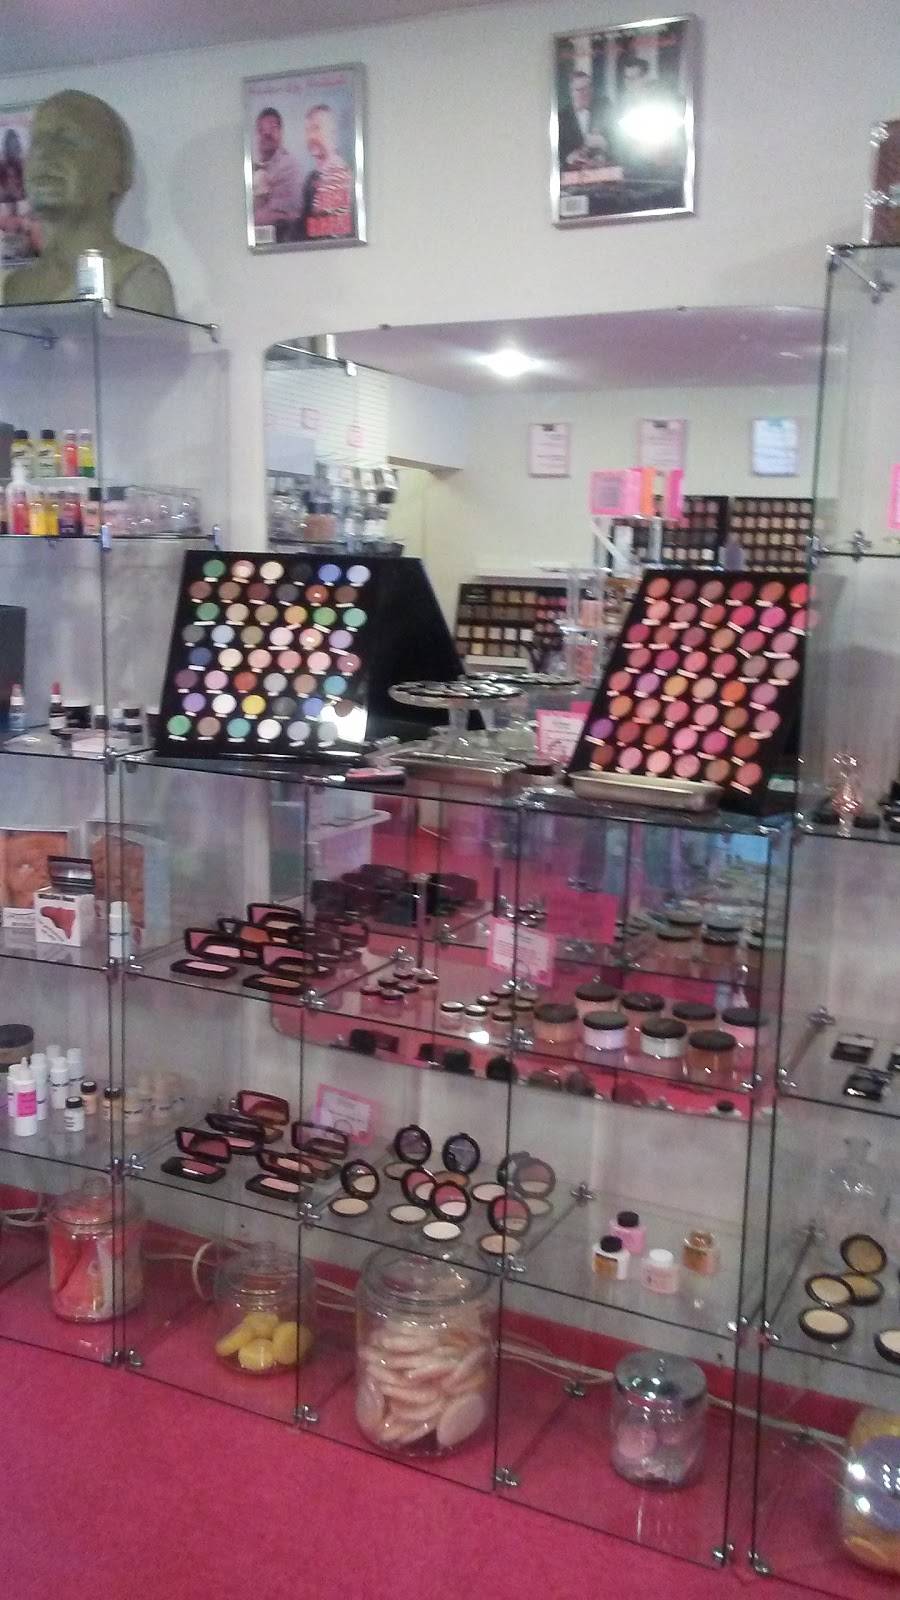 MakeUpMania | 1115 Acoma Street Suite 129 Inside The Evans School Enter on 11th Ave. Buzz in at that Door, Denver, CO 80204, USA | Phone: (303) 433-3400